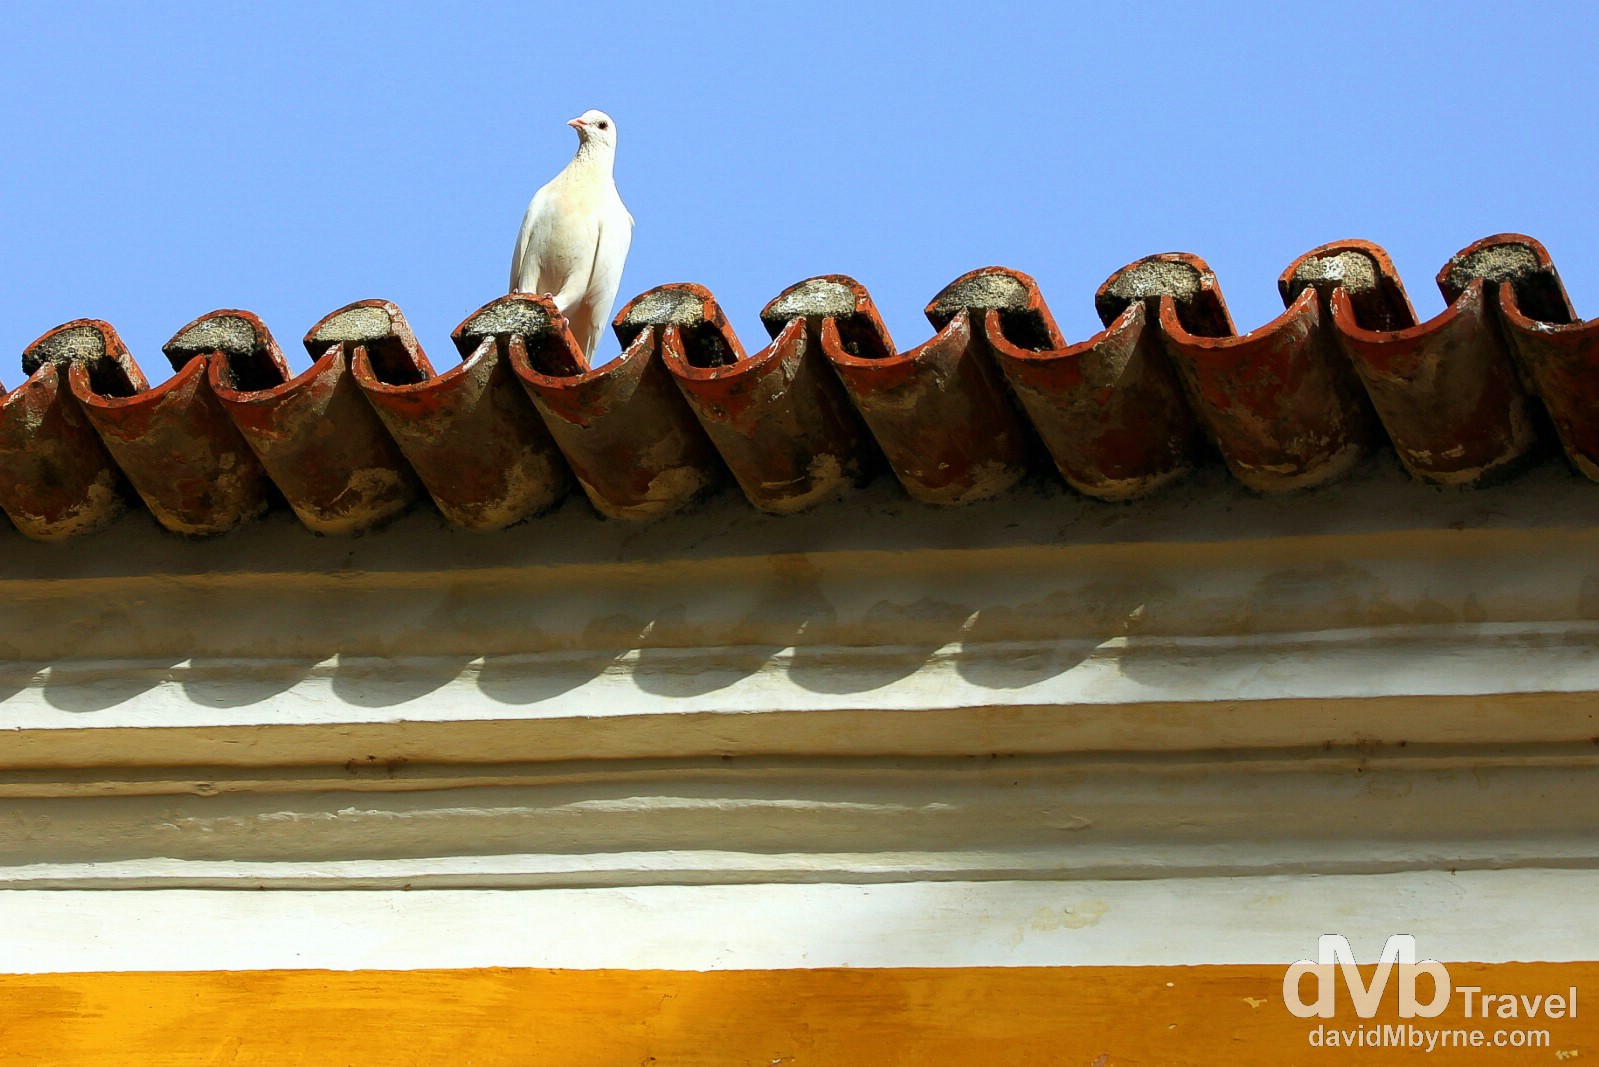 A dove perched on the roof of the ornate chapel of Quinta de Sant’Ana estate. Off the main courtyard of the Quinta, the church, dating to 1633, is the oldest part of the estate. The dozen or so doves who call the courtyard home really push the idyllic-o-meter into overdrive. Gradil, Mafra, Portugal. August 21st 2013.